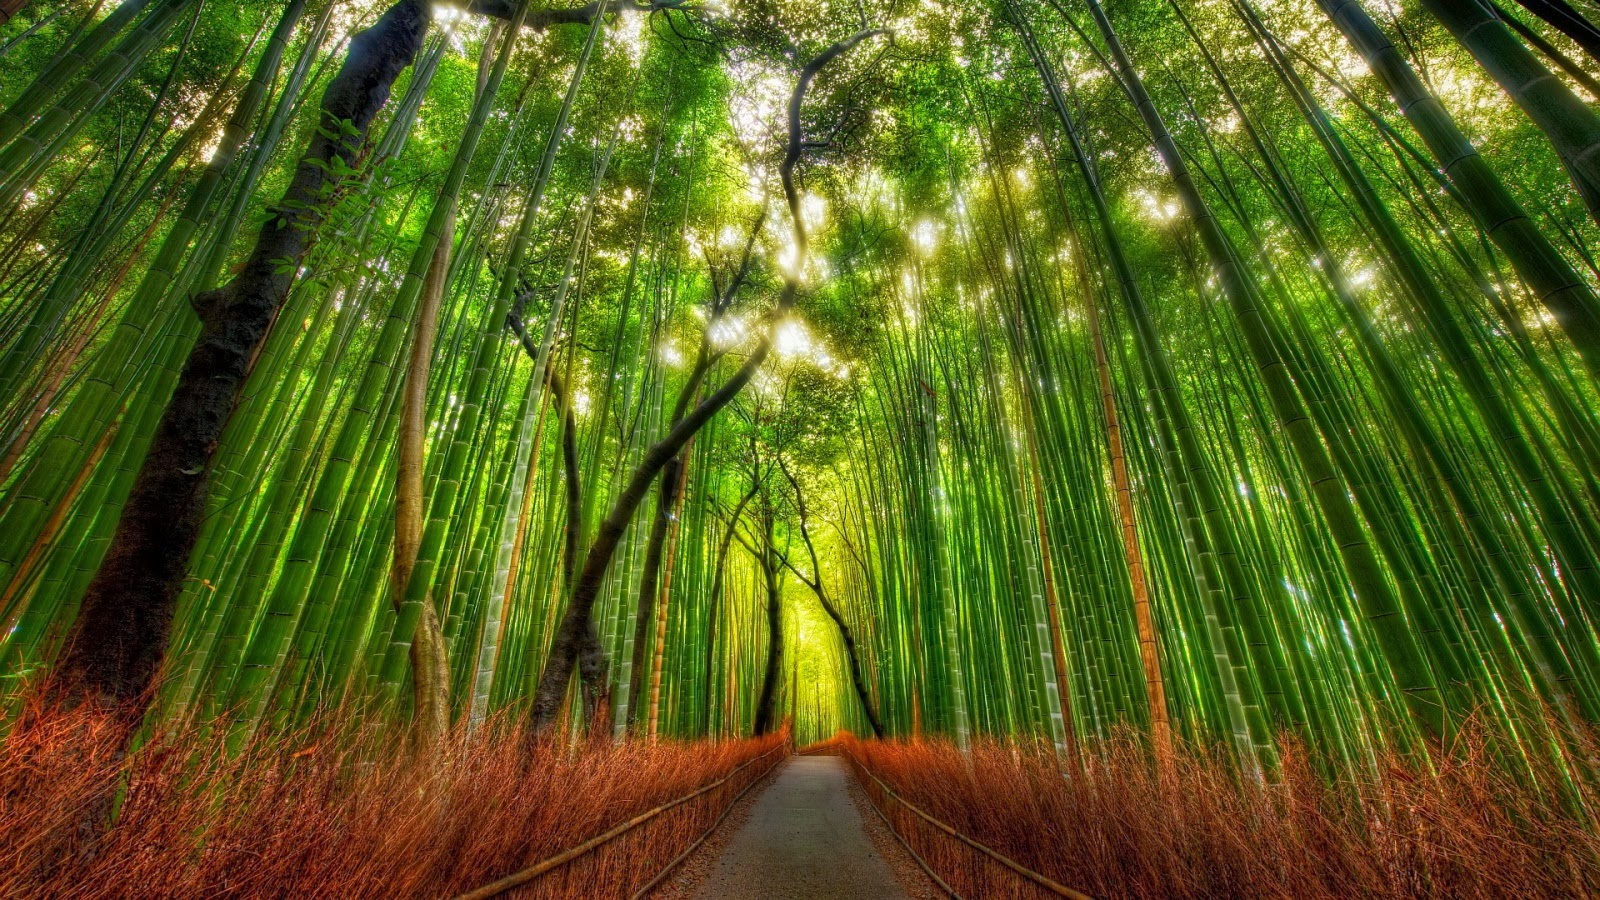 bamboo wallpaper,natural landscape,people in nature,nature,green,tree